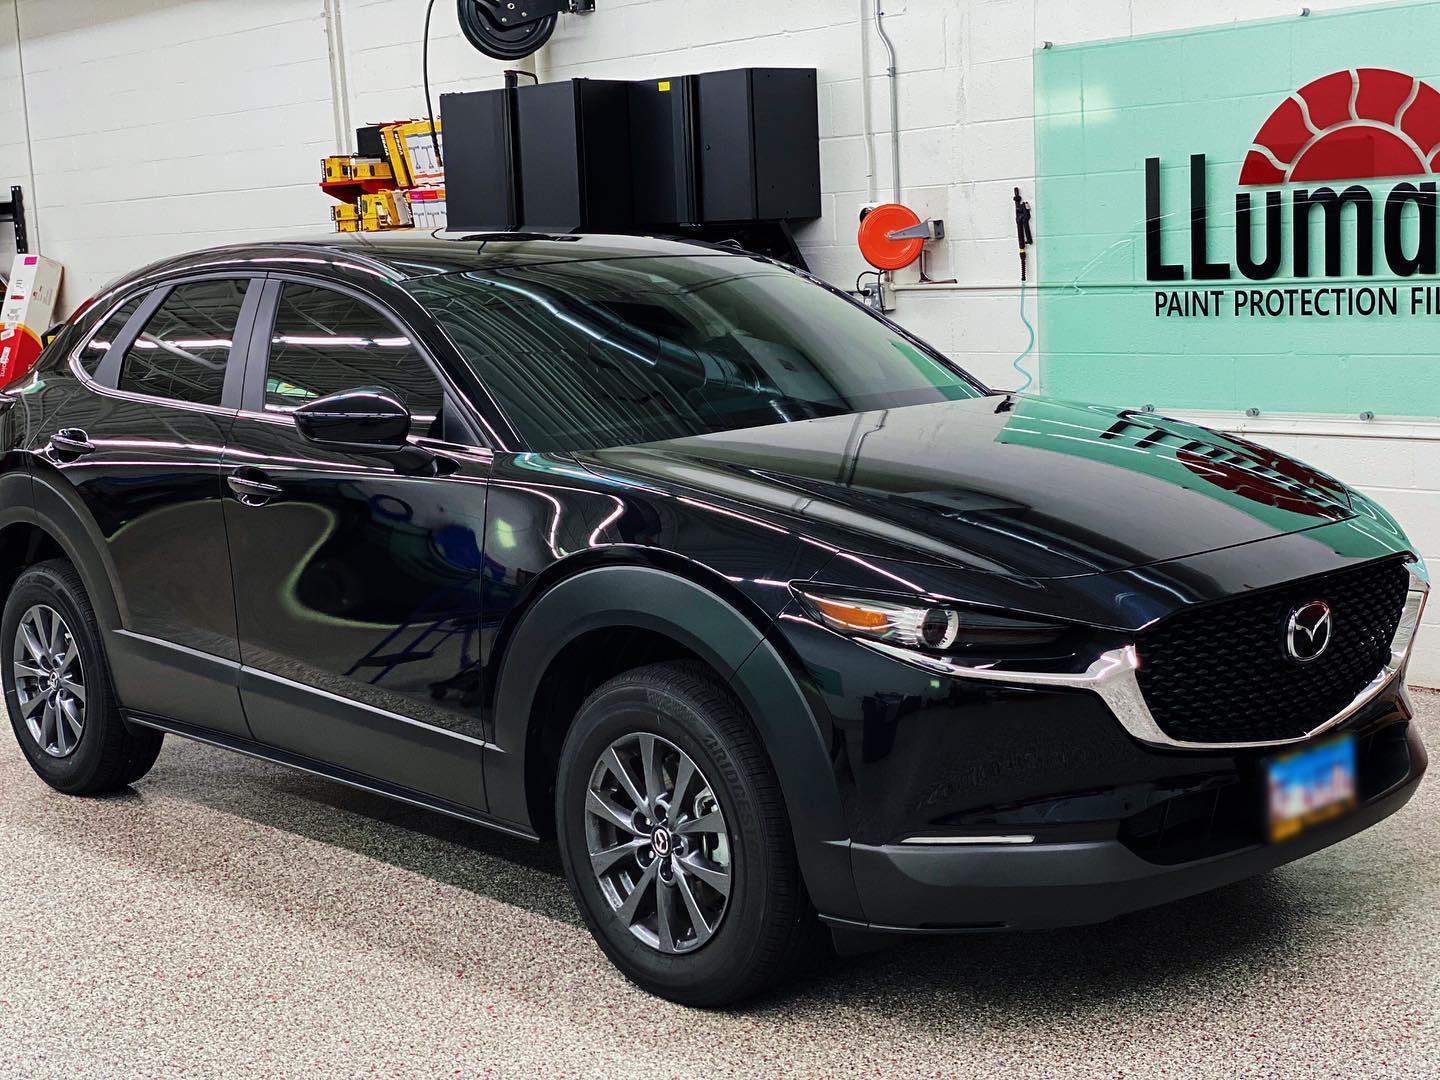 A black mazda cx-30 is parked in a garage next to a sign that says lluma.